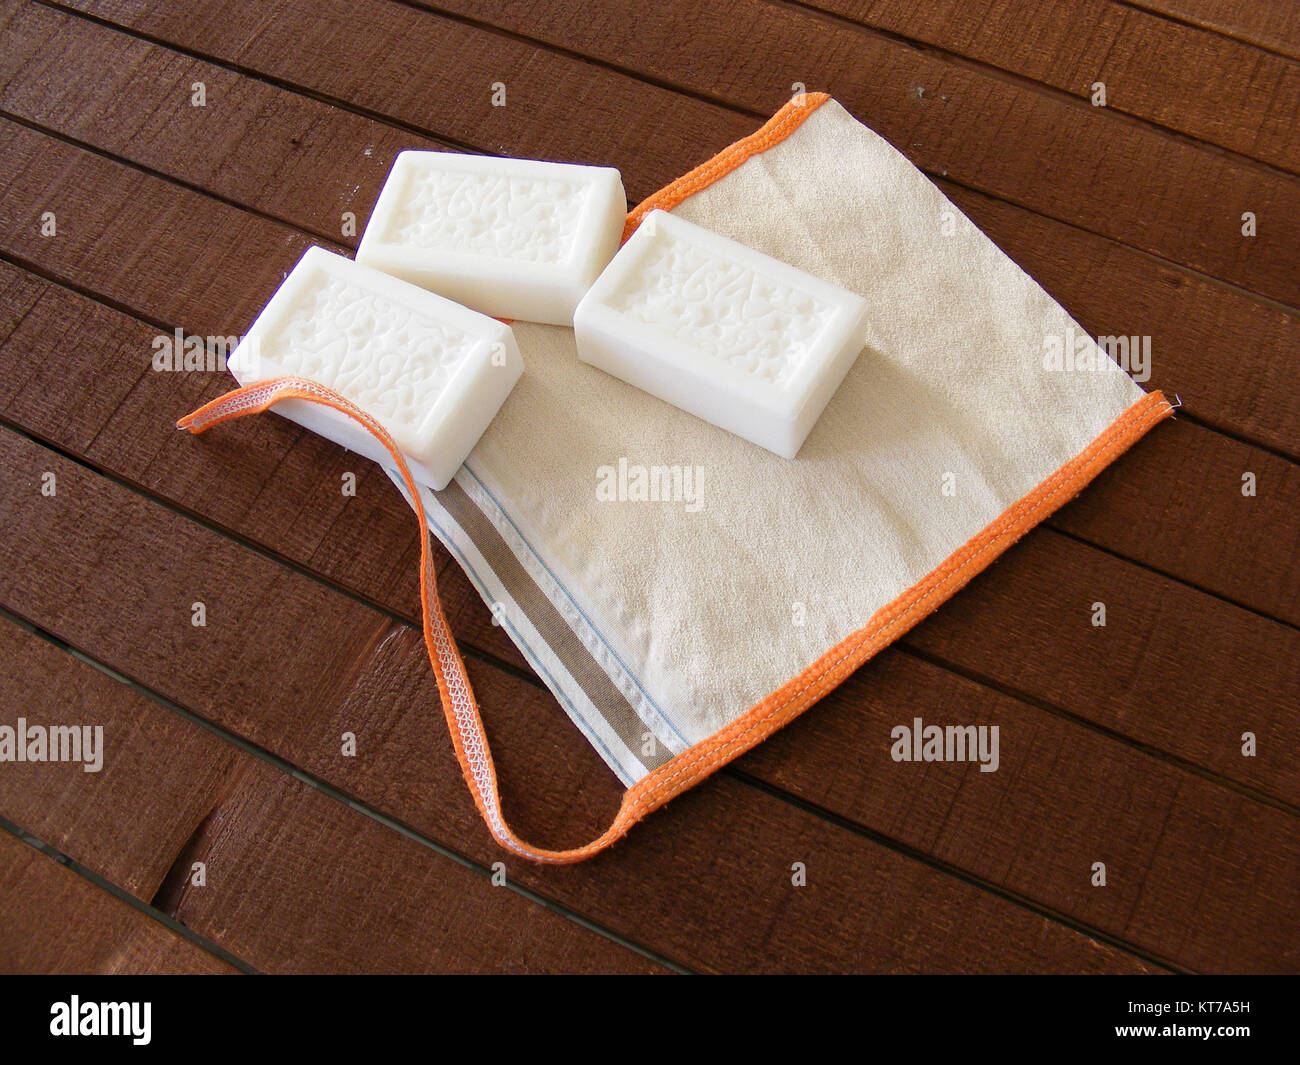 Purse for bath, white soap for bath, purse to remove dirt, turkish bath, pouch,Bathing and cleaning, pouch throwing, bath and pouch, massage Stock Photo